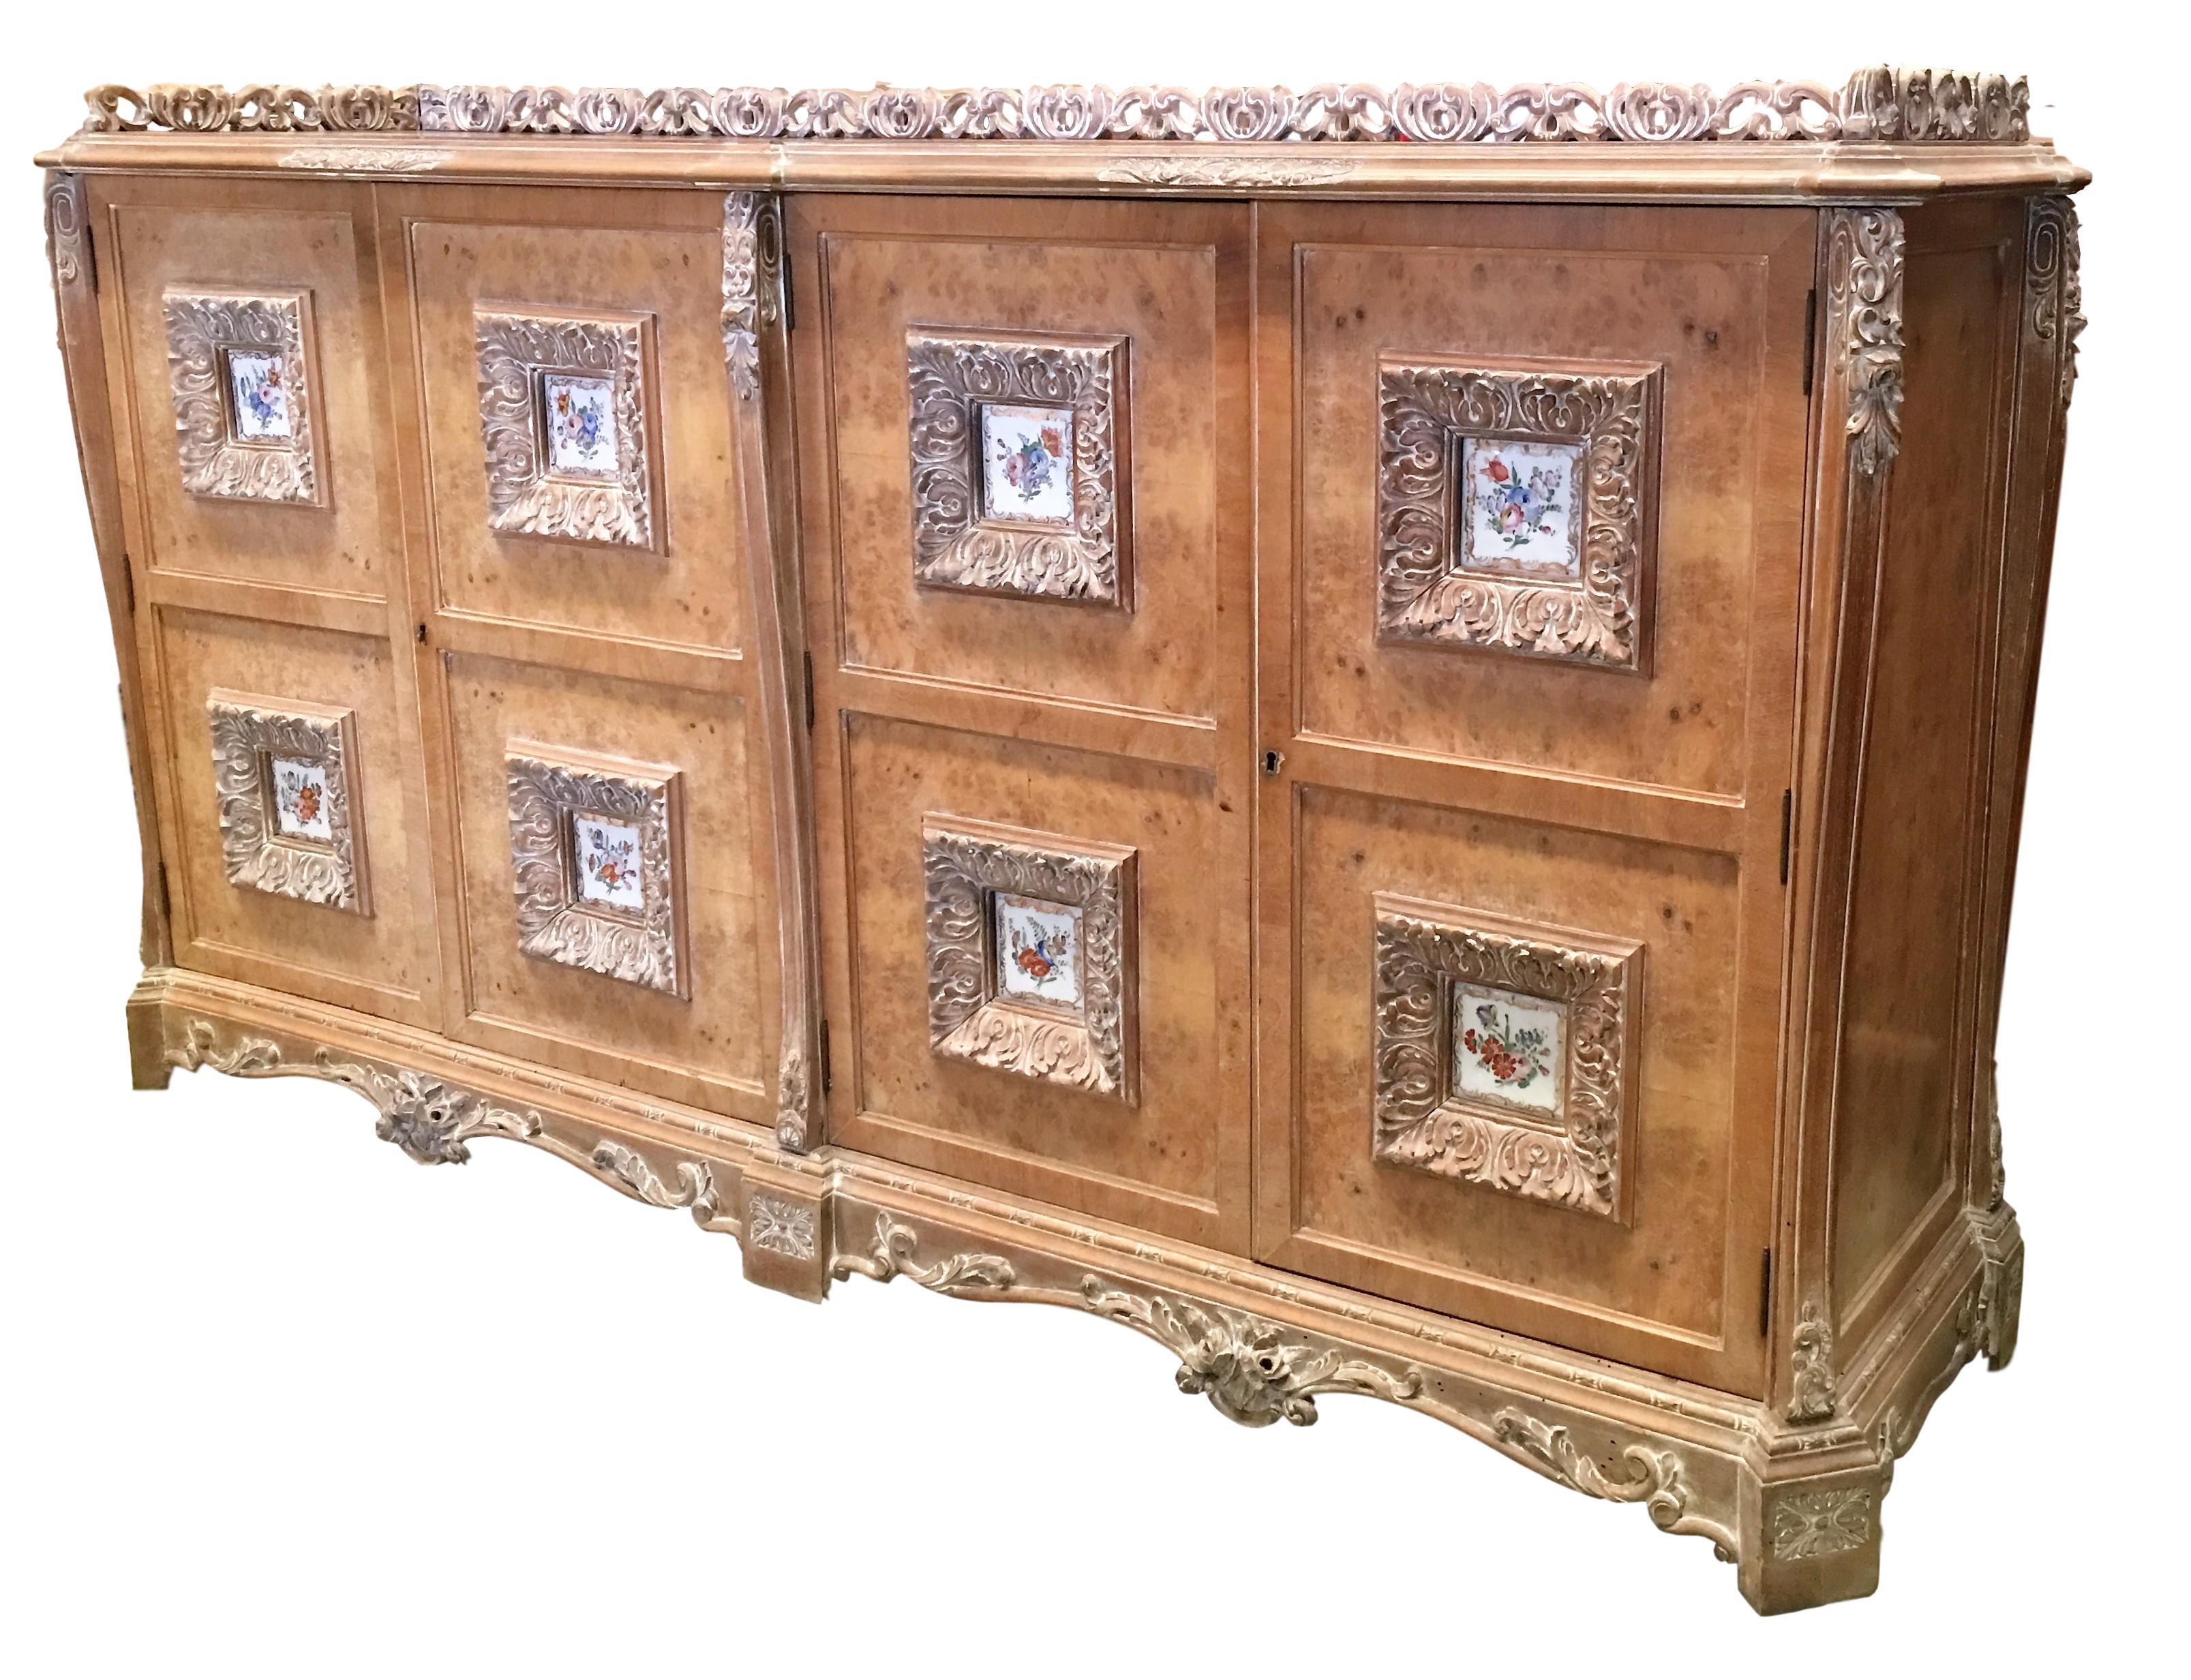 Spanish Colonial Spanish Mid-20th Carved Sideboard with Four Decorated Ceramic Panels in Doors